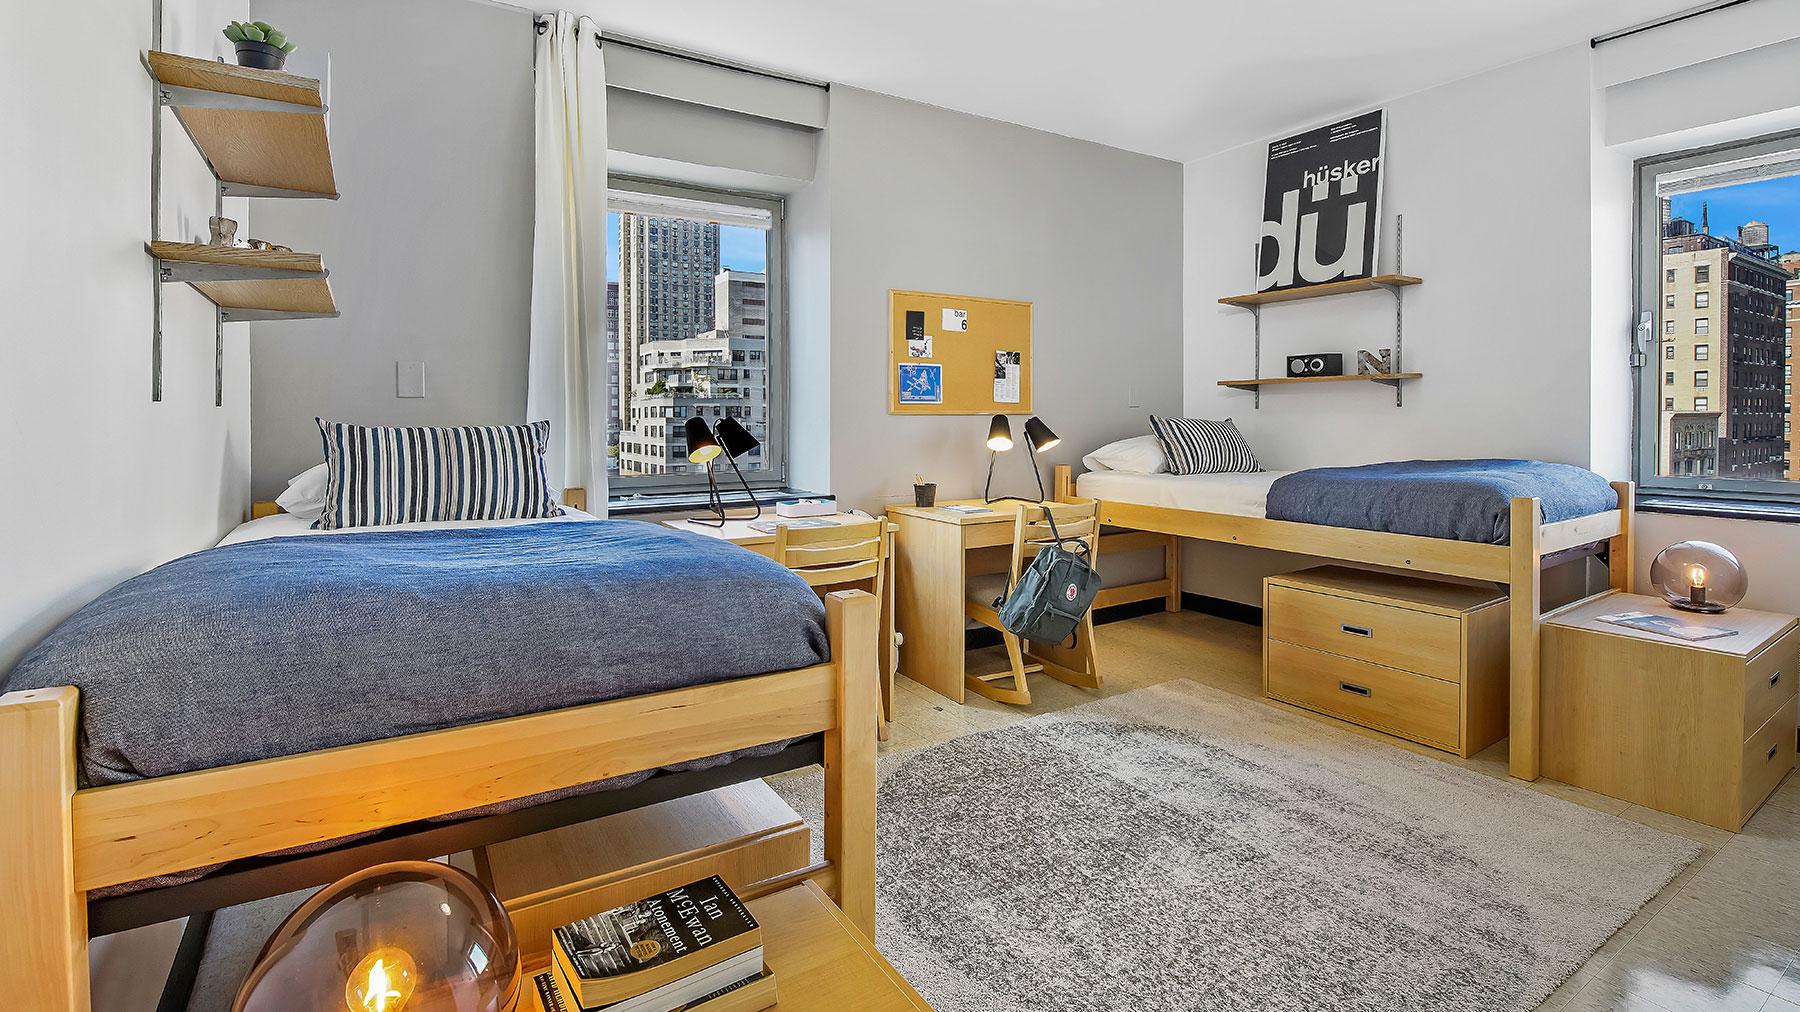 40x rule home rentals for students in  NYC